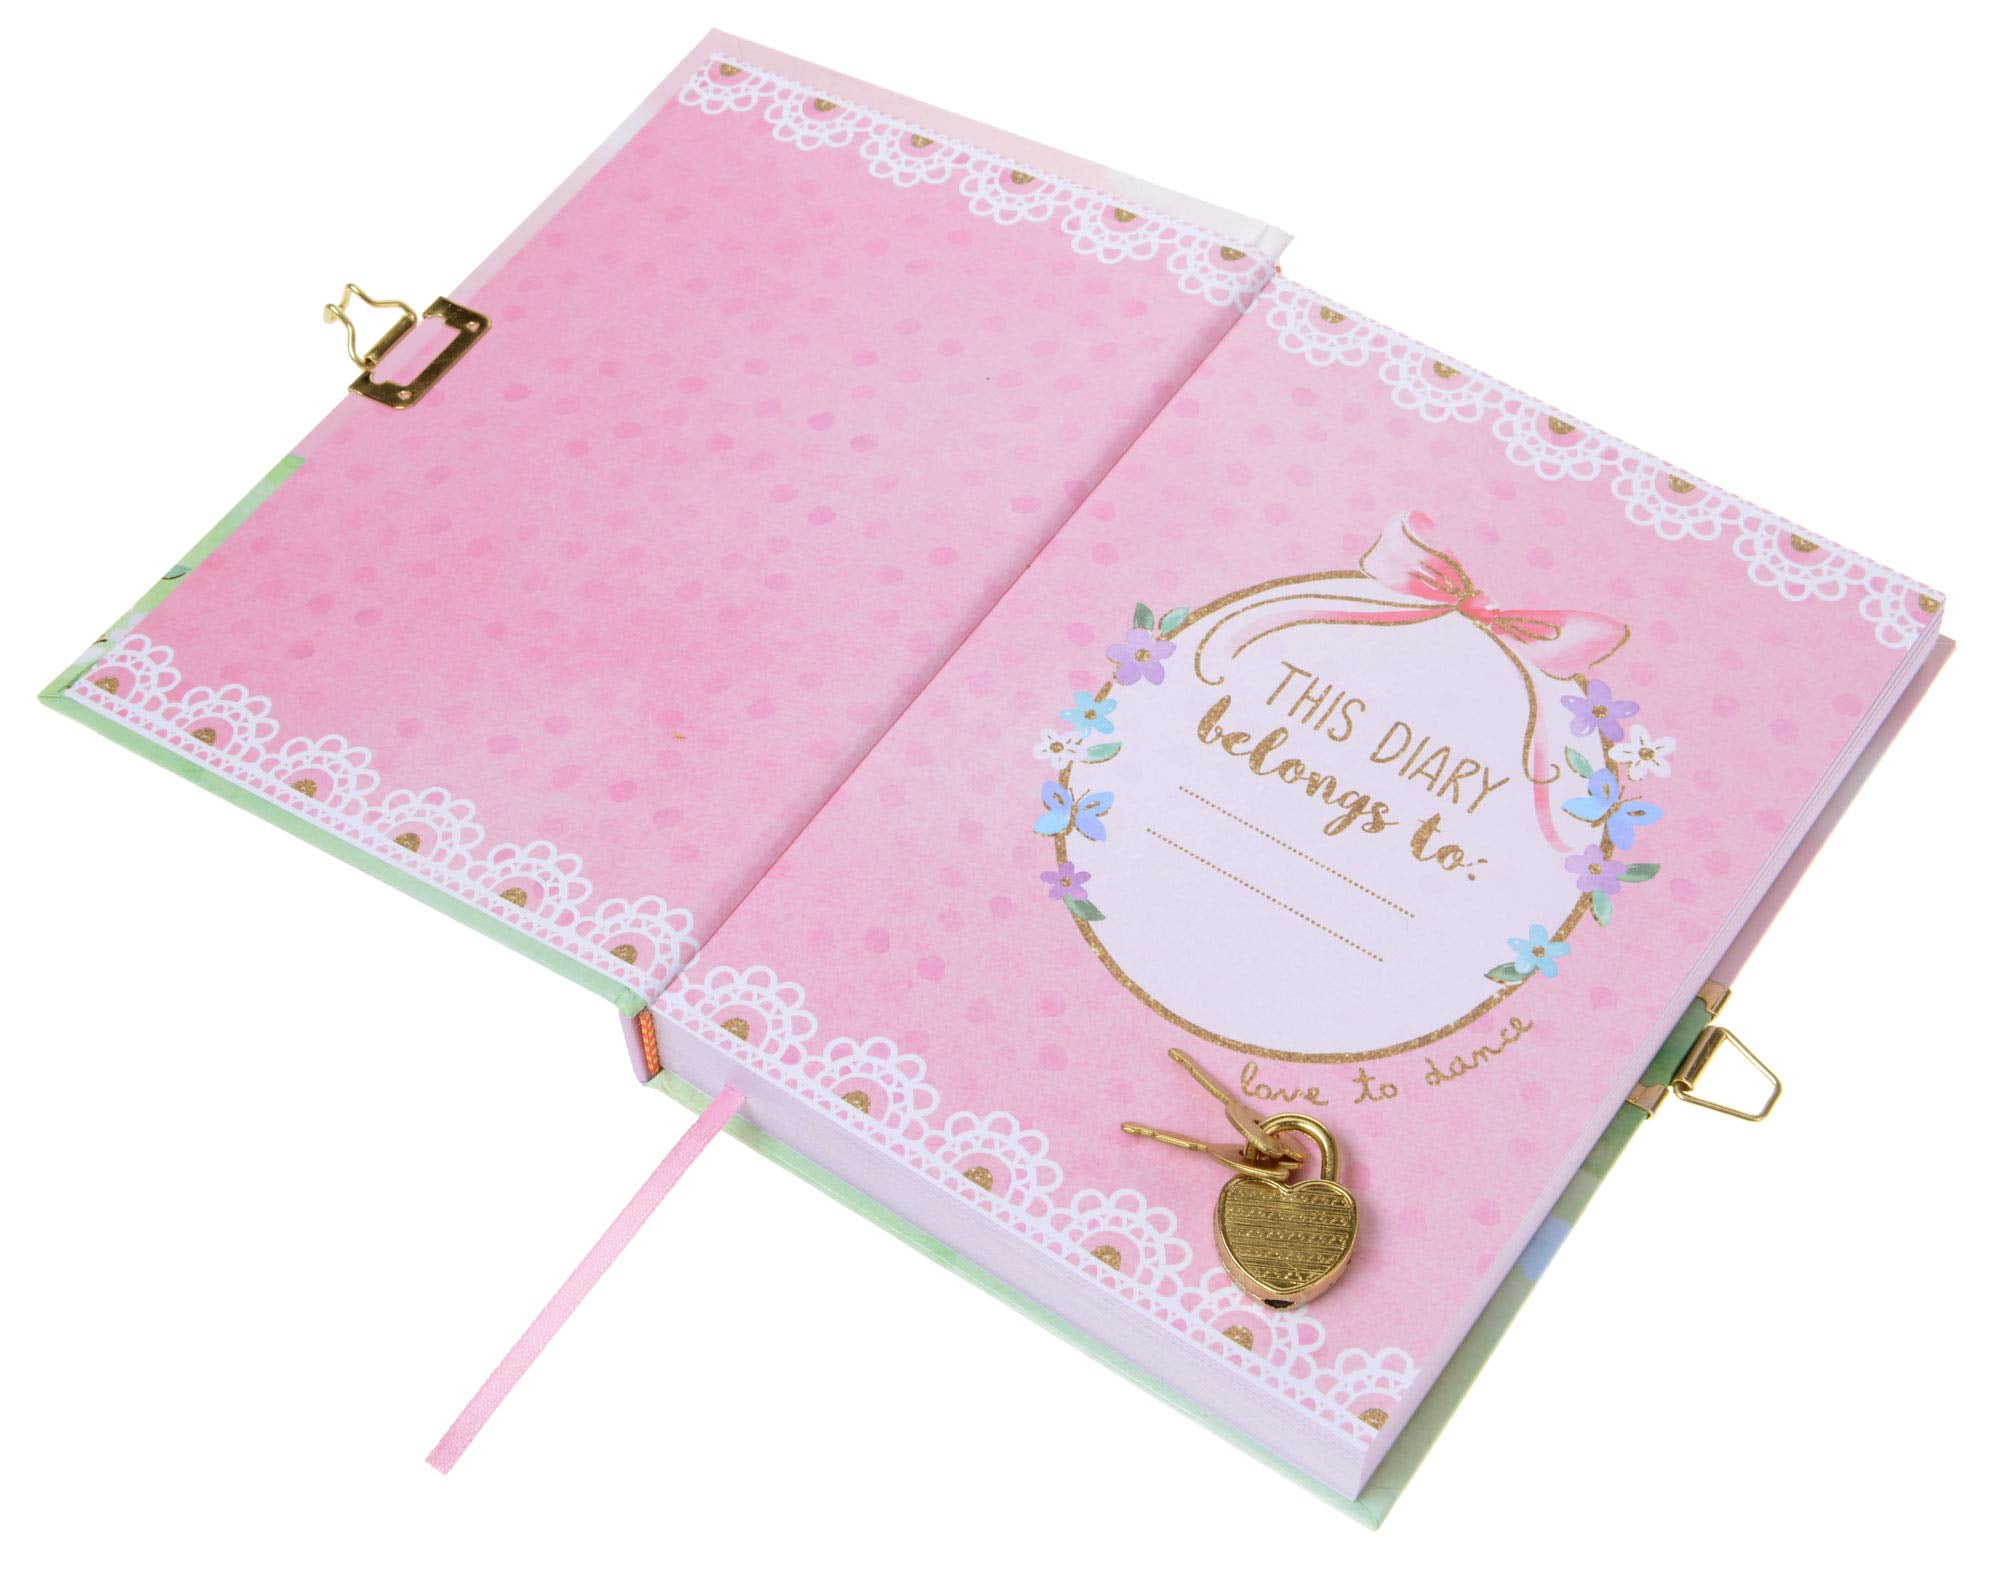 GINMLYDA Girls Diary with Lock for Kids, Pink Diaries 7.1x5.3 160 Pages  Cute Girl Journal Secret Notebook with Lock and Key for Little Kid Writing